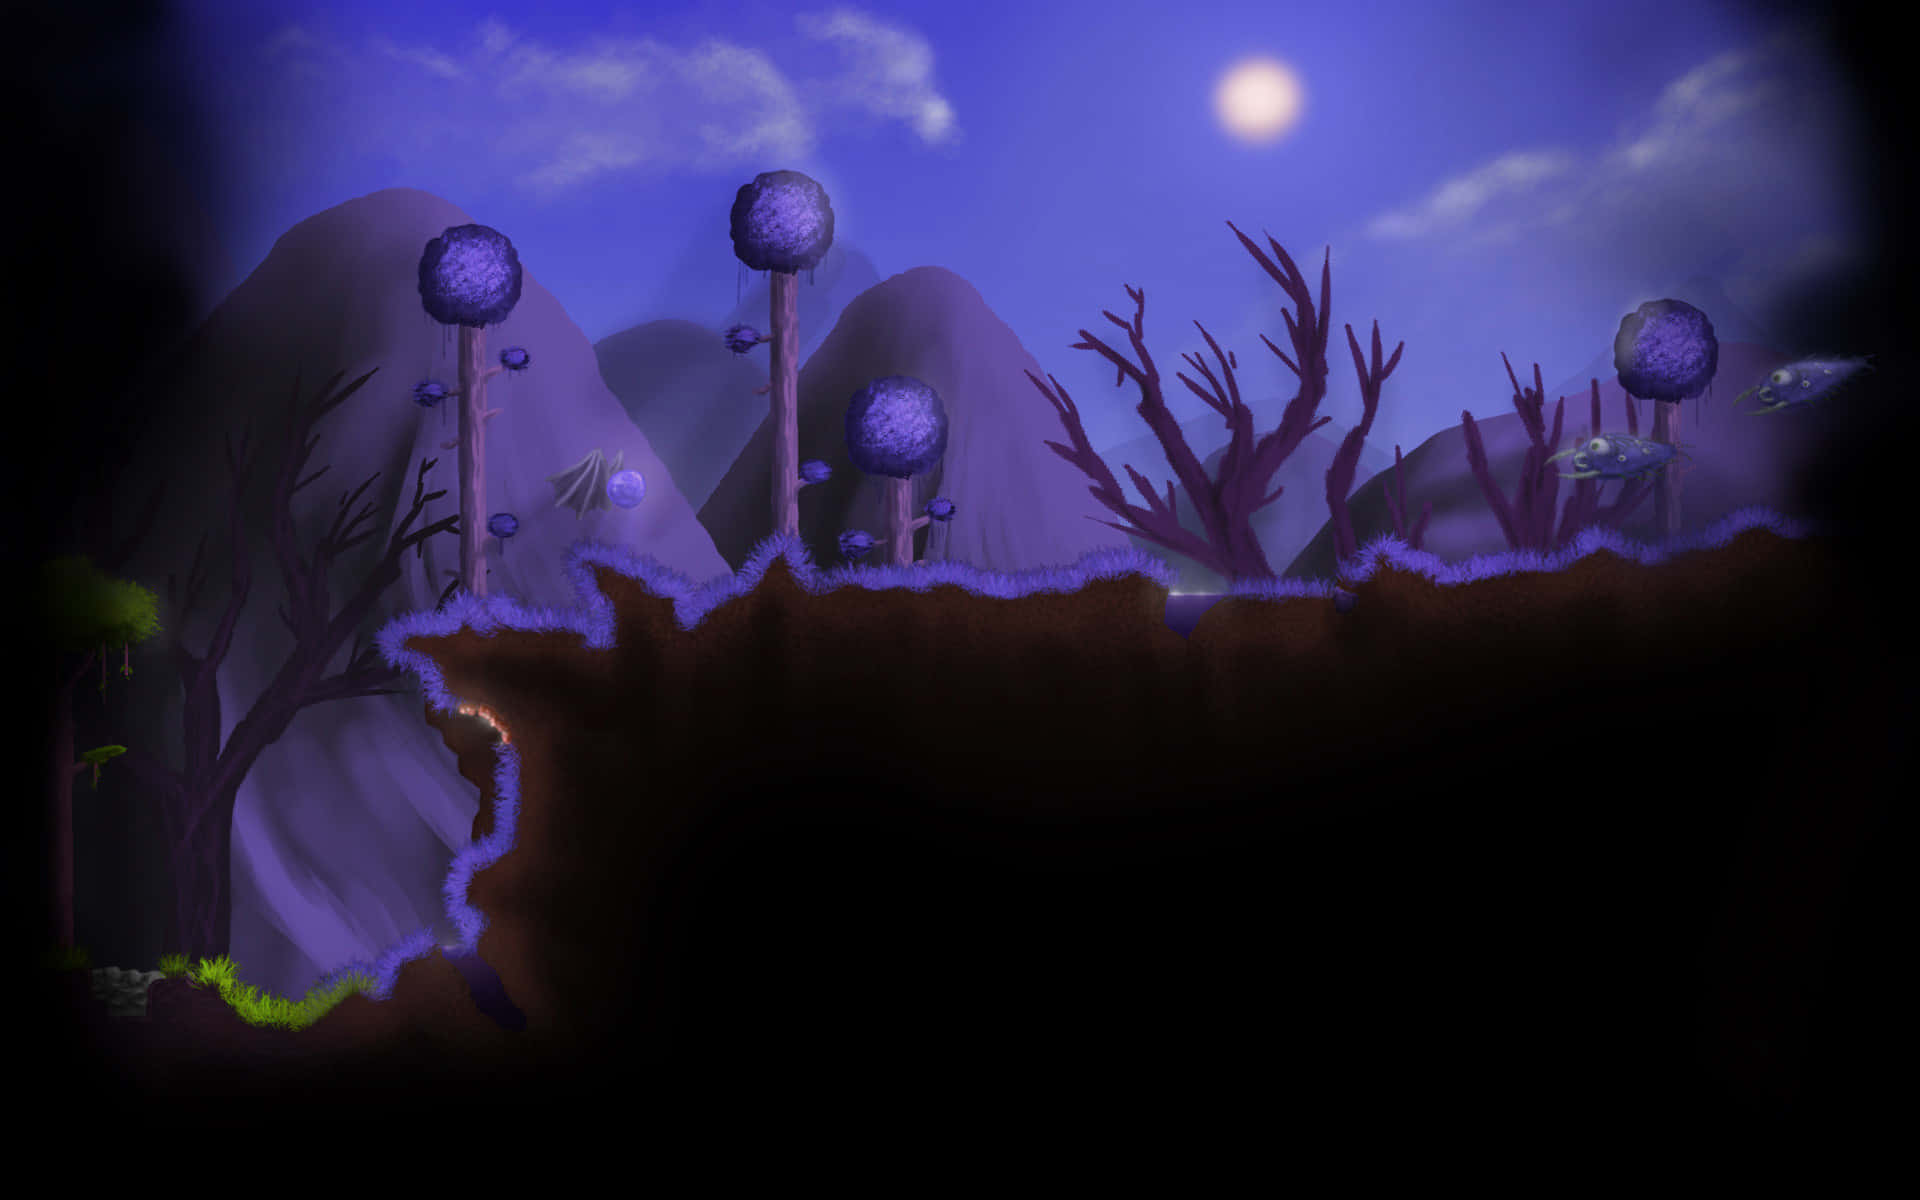 "Explore the unknown worlds of Terraria!"